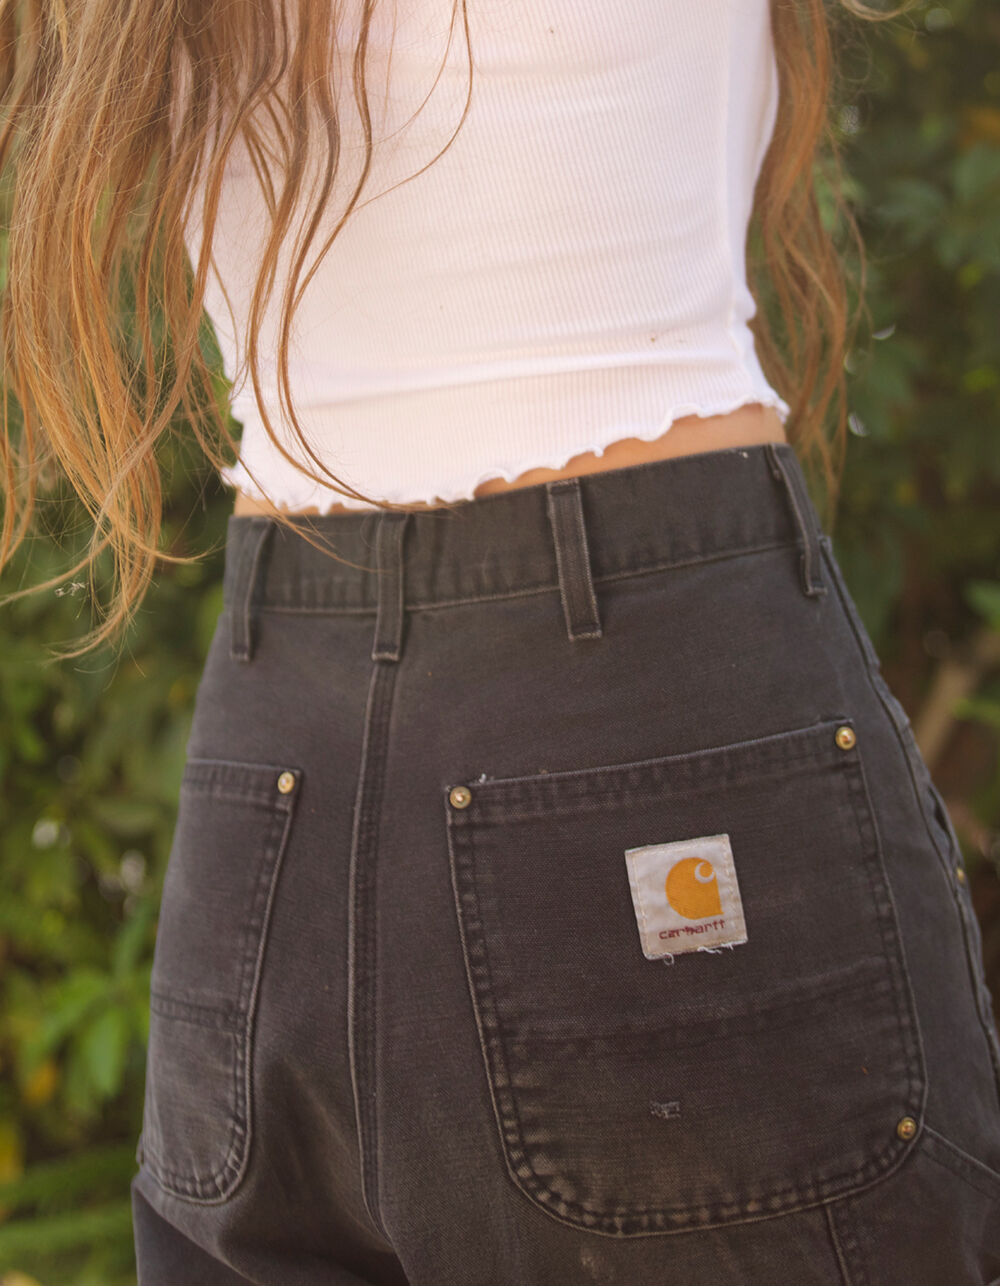 RESTORED by Tillys Womens Reworked Carhartt Jeans - BLACK